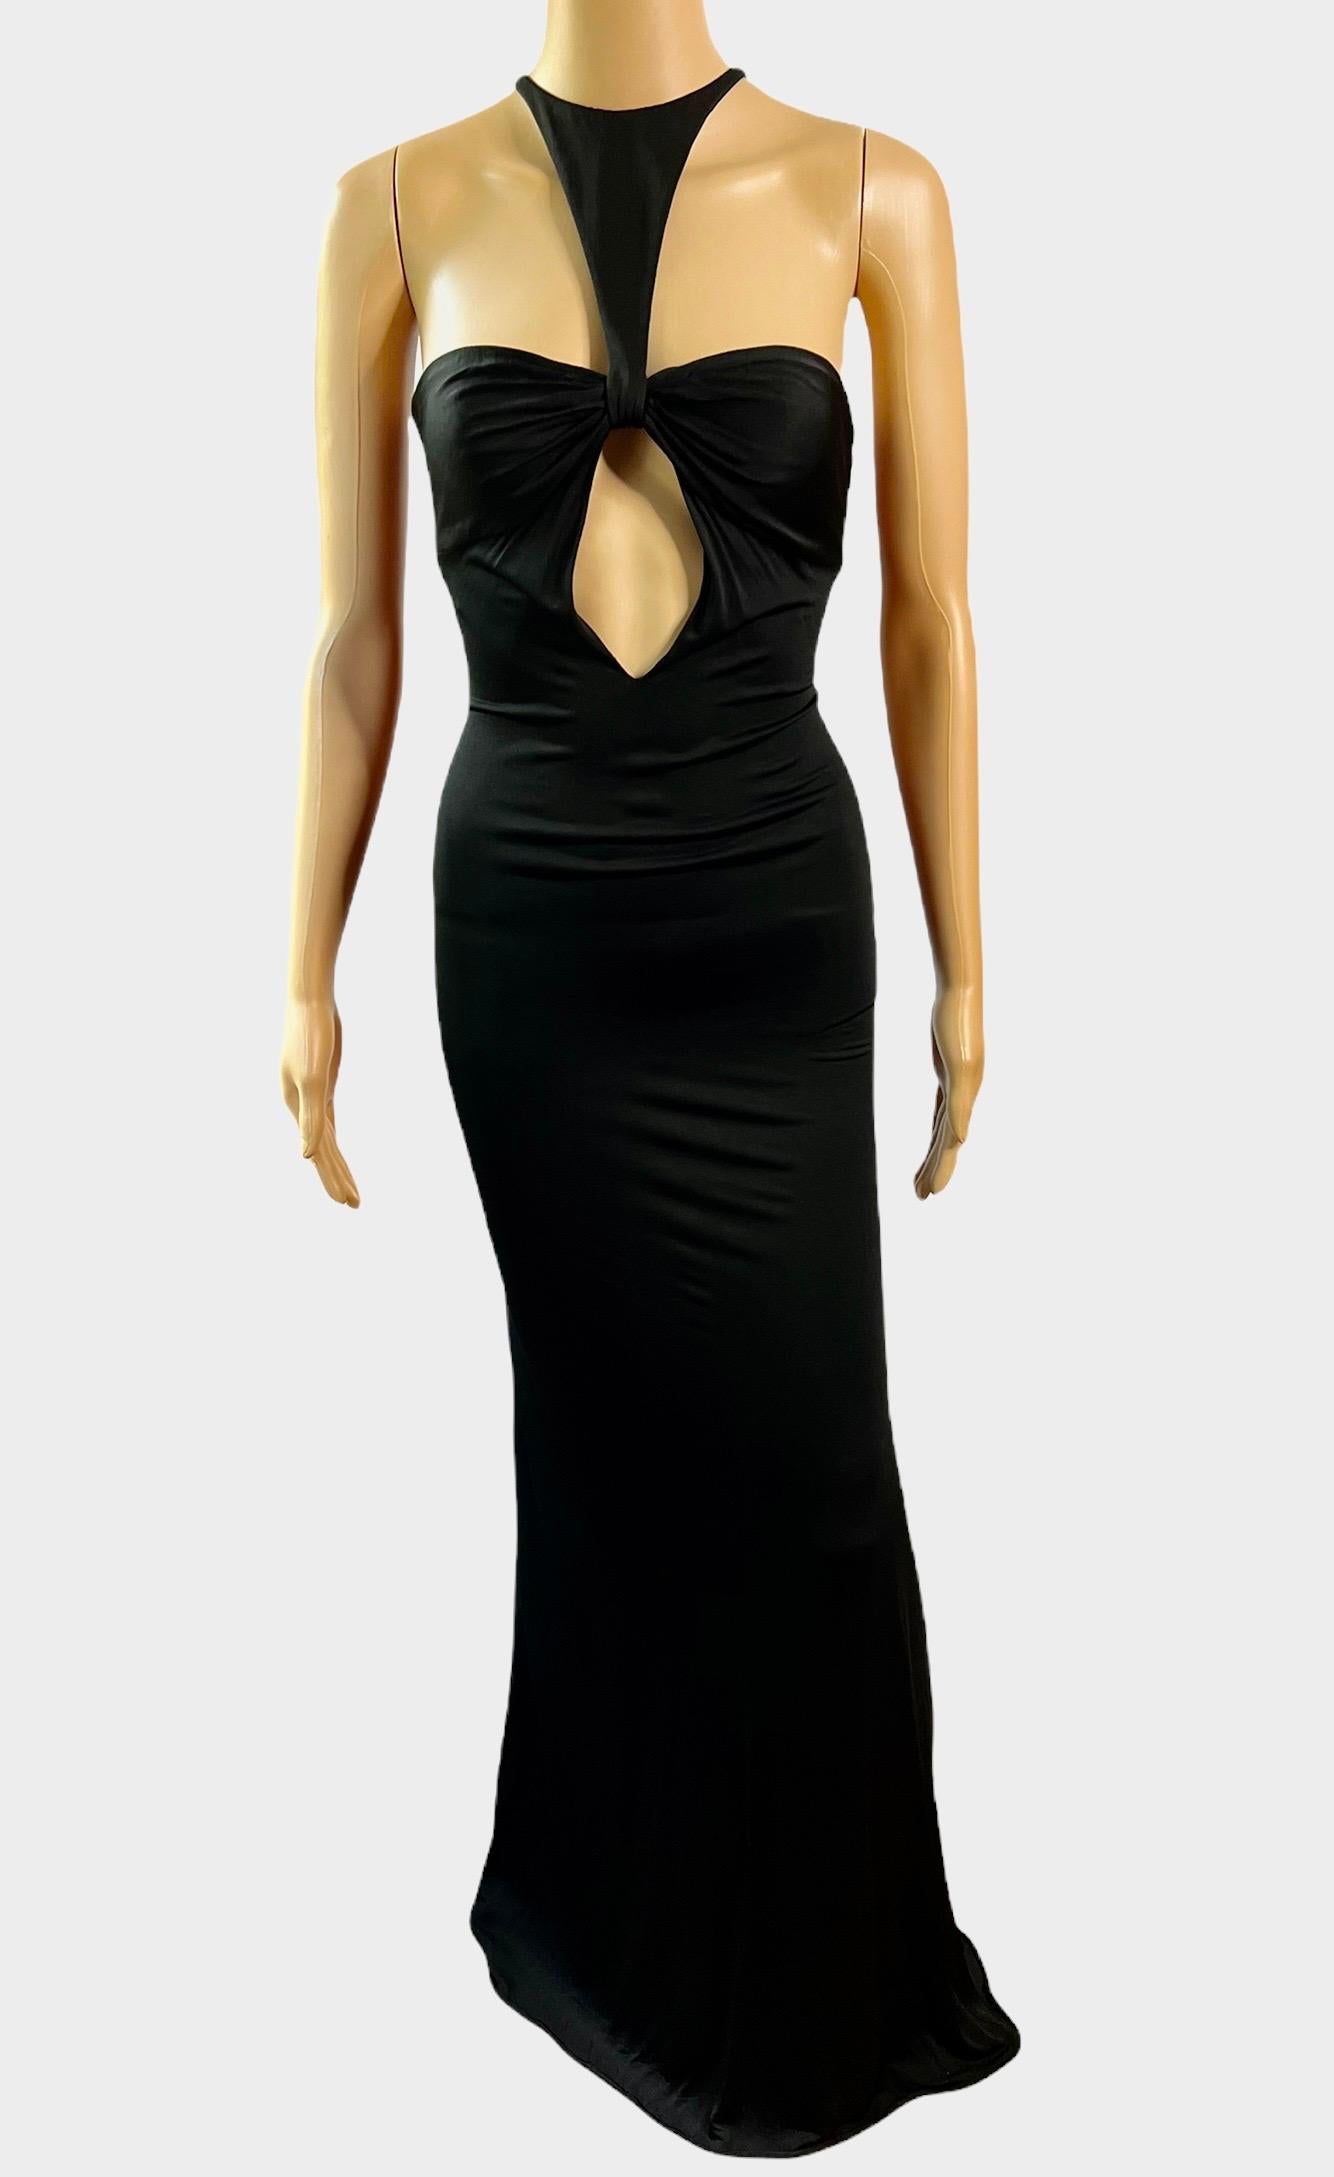 Women's Tom Ford for Gucci F/W 2004 Plunging Cutout Black Evening Dress Gown